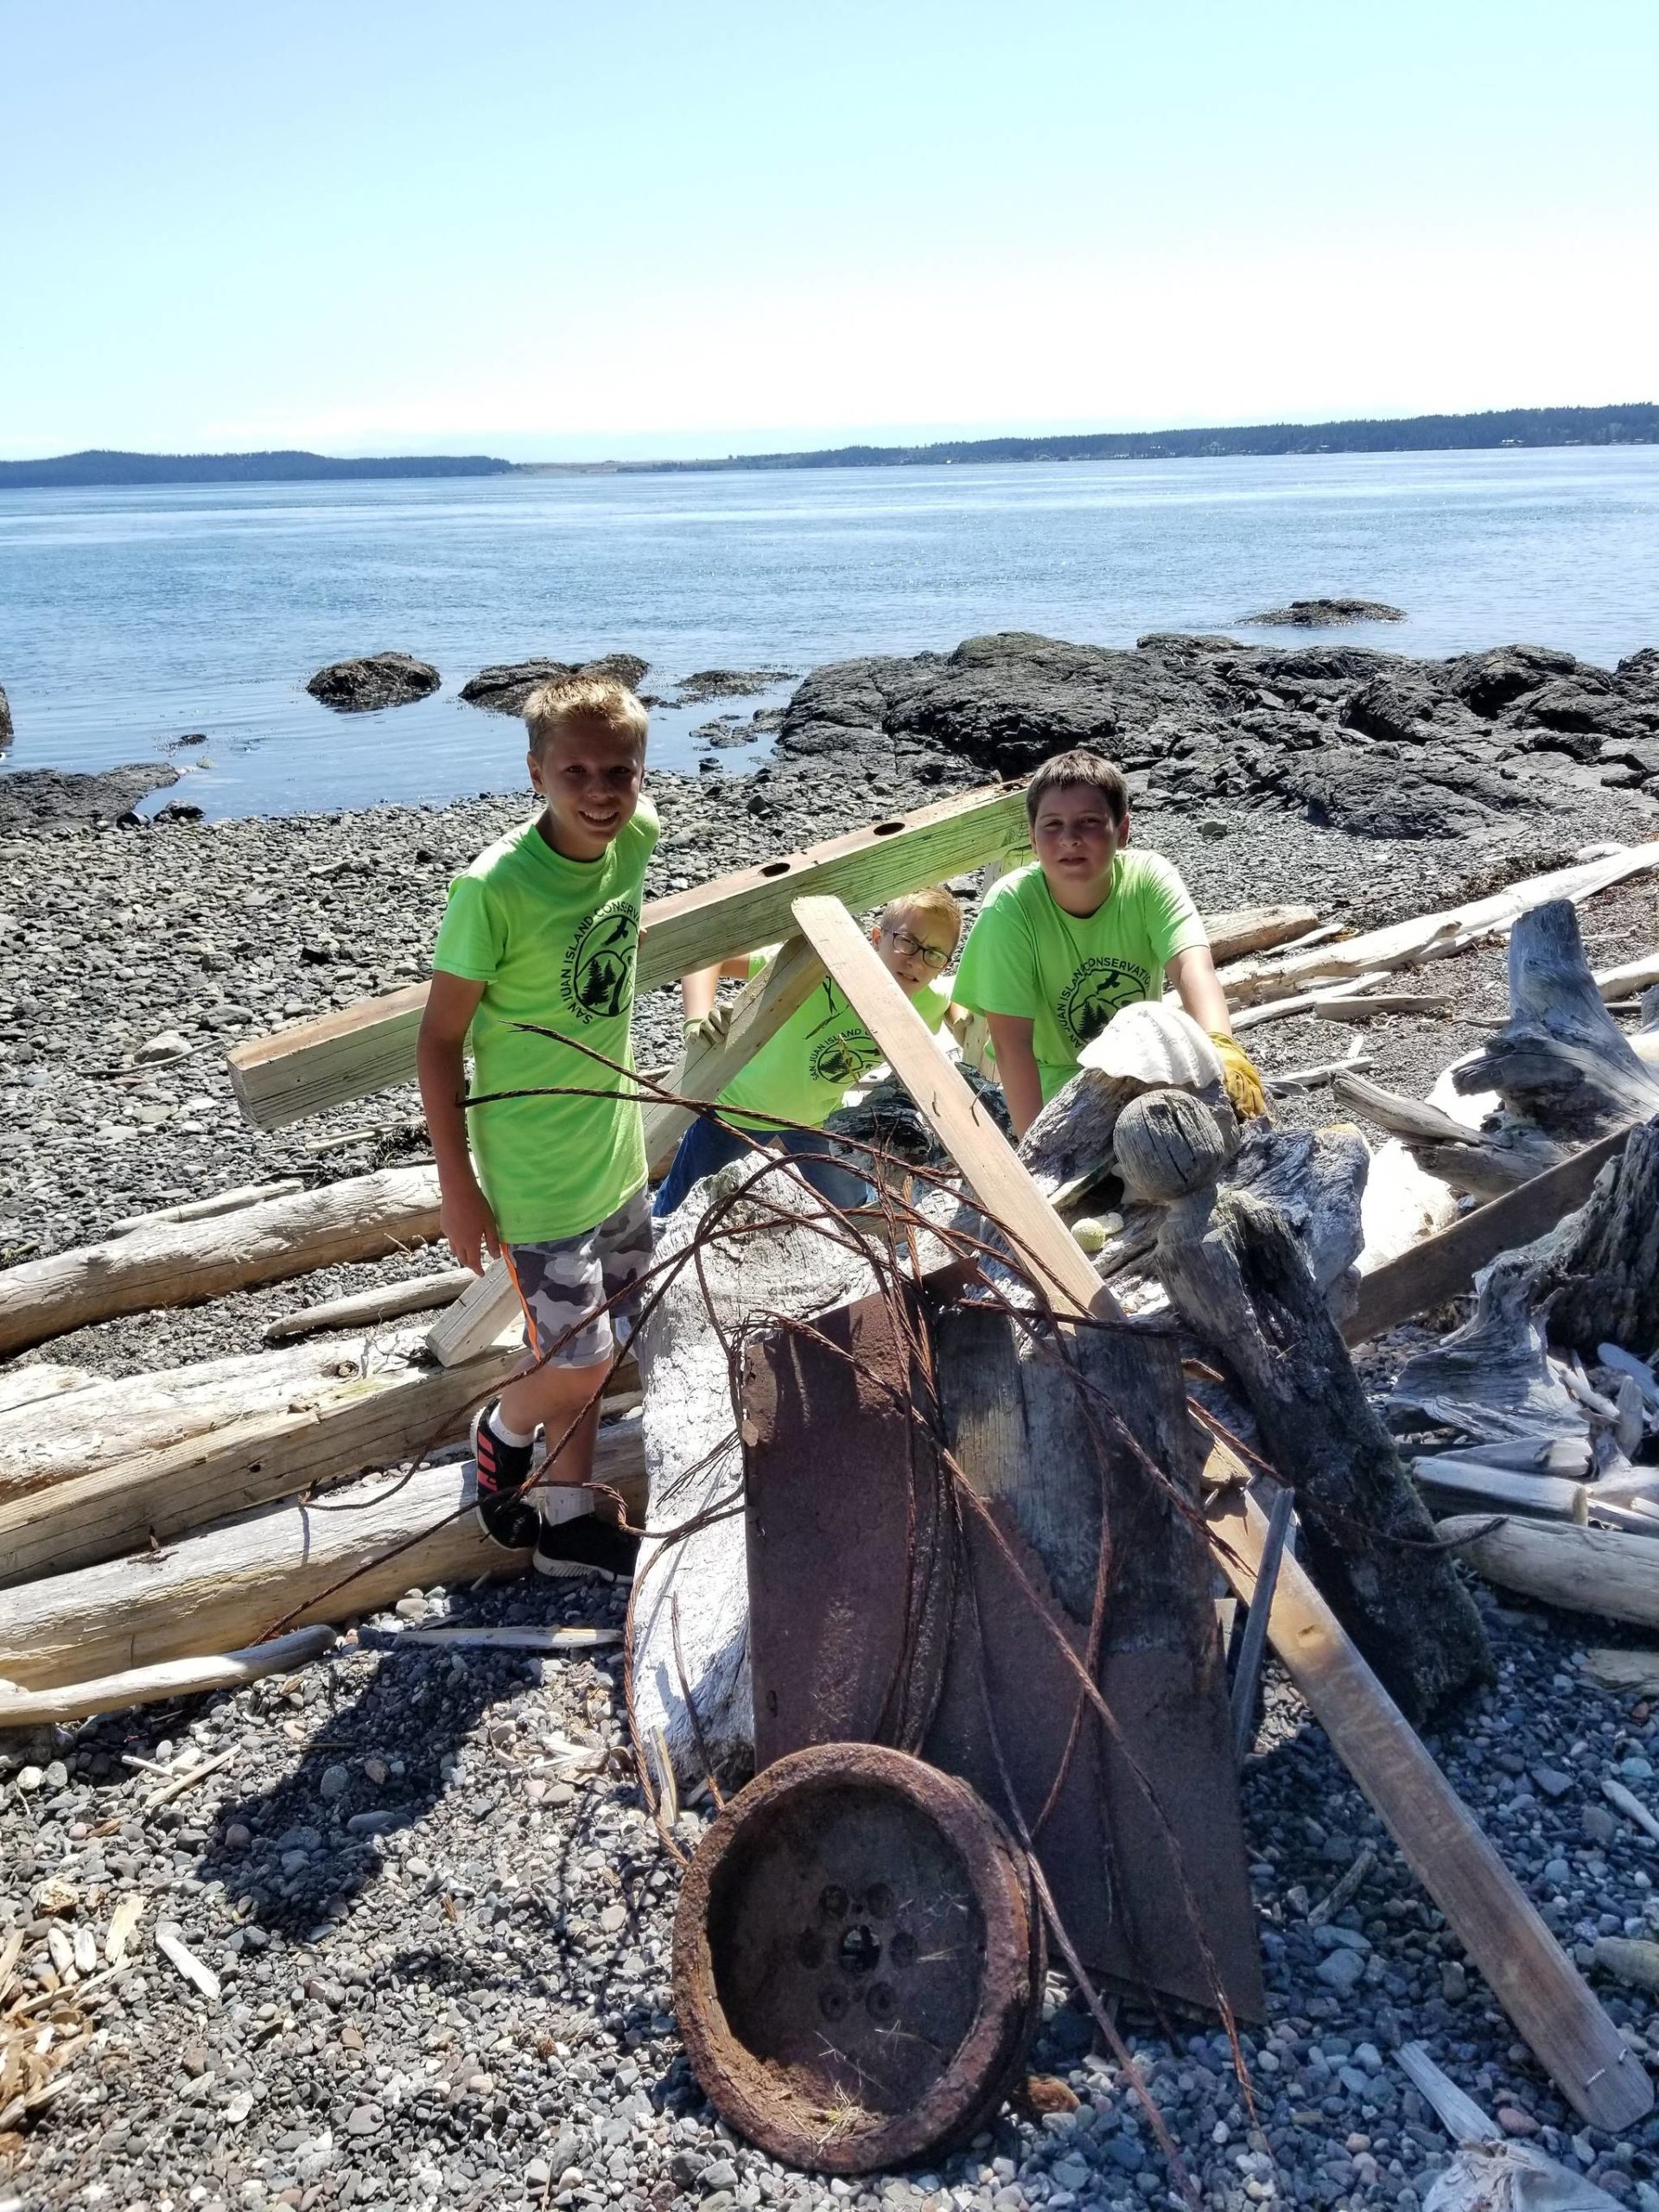 Brendan Reiff, Malachi Cullen and Aiden Greene participate in a Youth Conservation Corpse beach clean-up at Jackson Beach in July 2019. (Contributed photo)